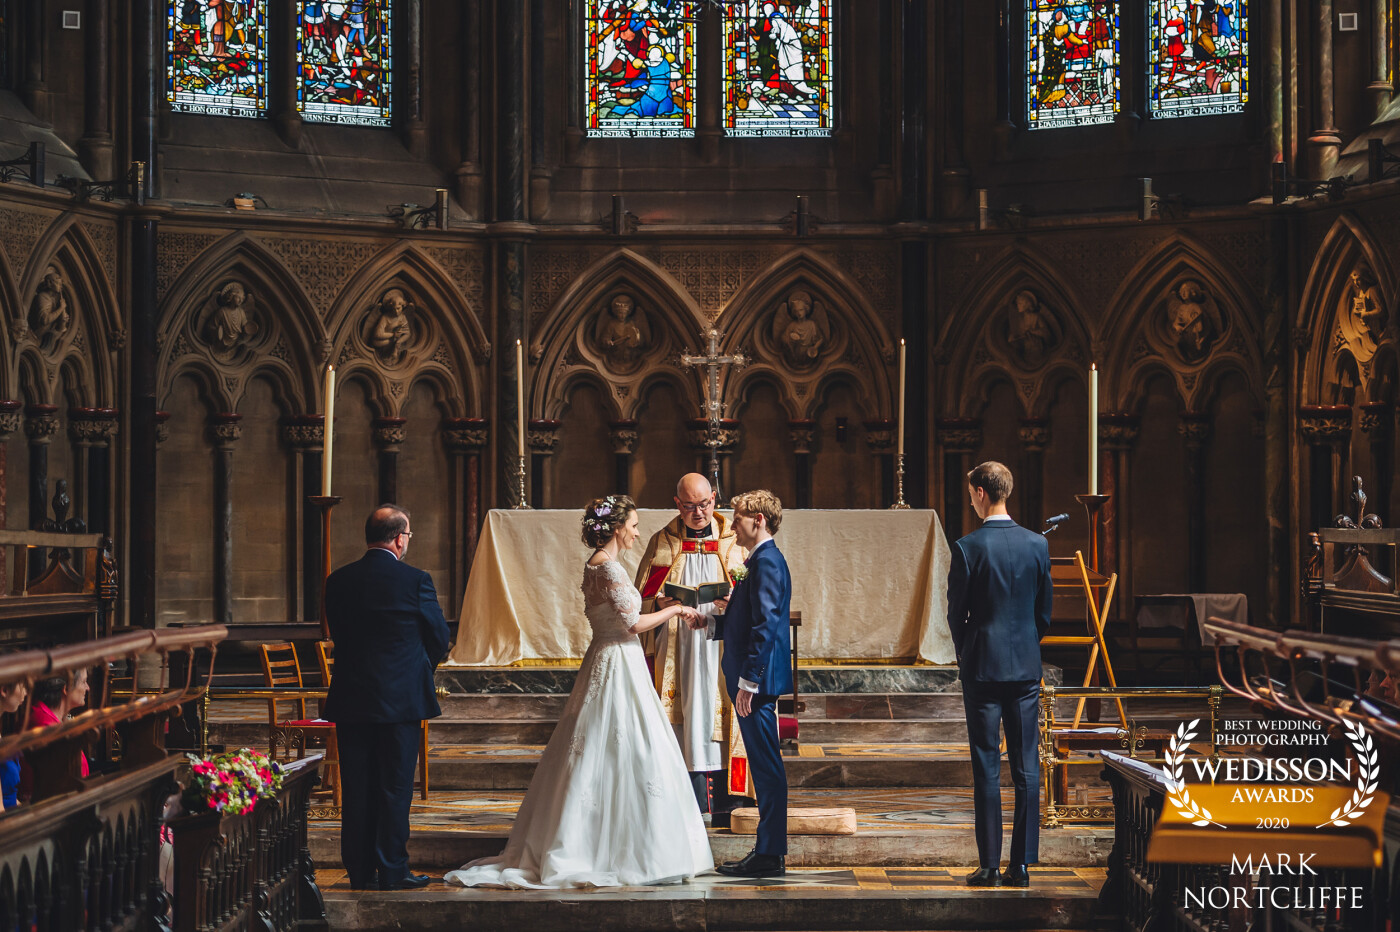 Jennifer and Stephen got married at the magnificent St John College Chapel in Cambridge. The stunning leaded stained glass windows at the end of the chapel wrapped a beautiful light around the gallery.  Amazing elegant and sophisticated wedding day for a very special couple.